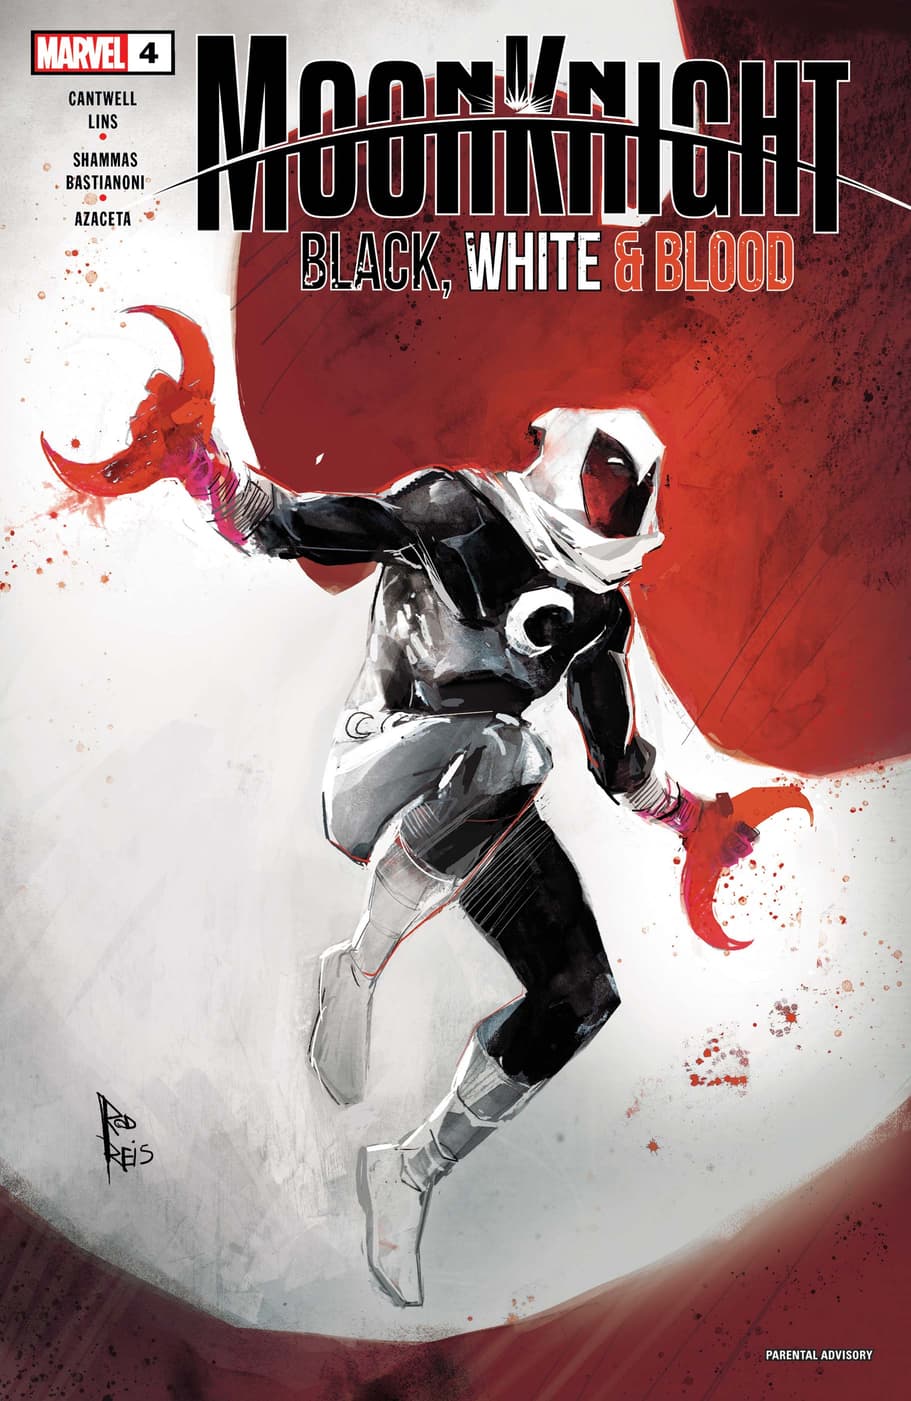 MOON KNIGHT: BLACK, WHITE & BLOOD #4 cover by Rod Reis